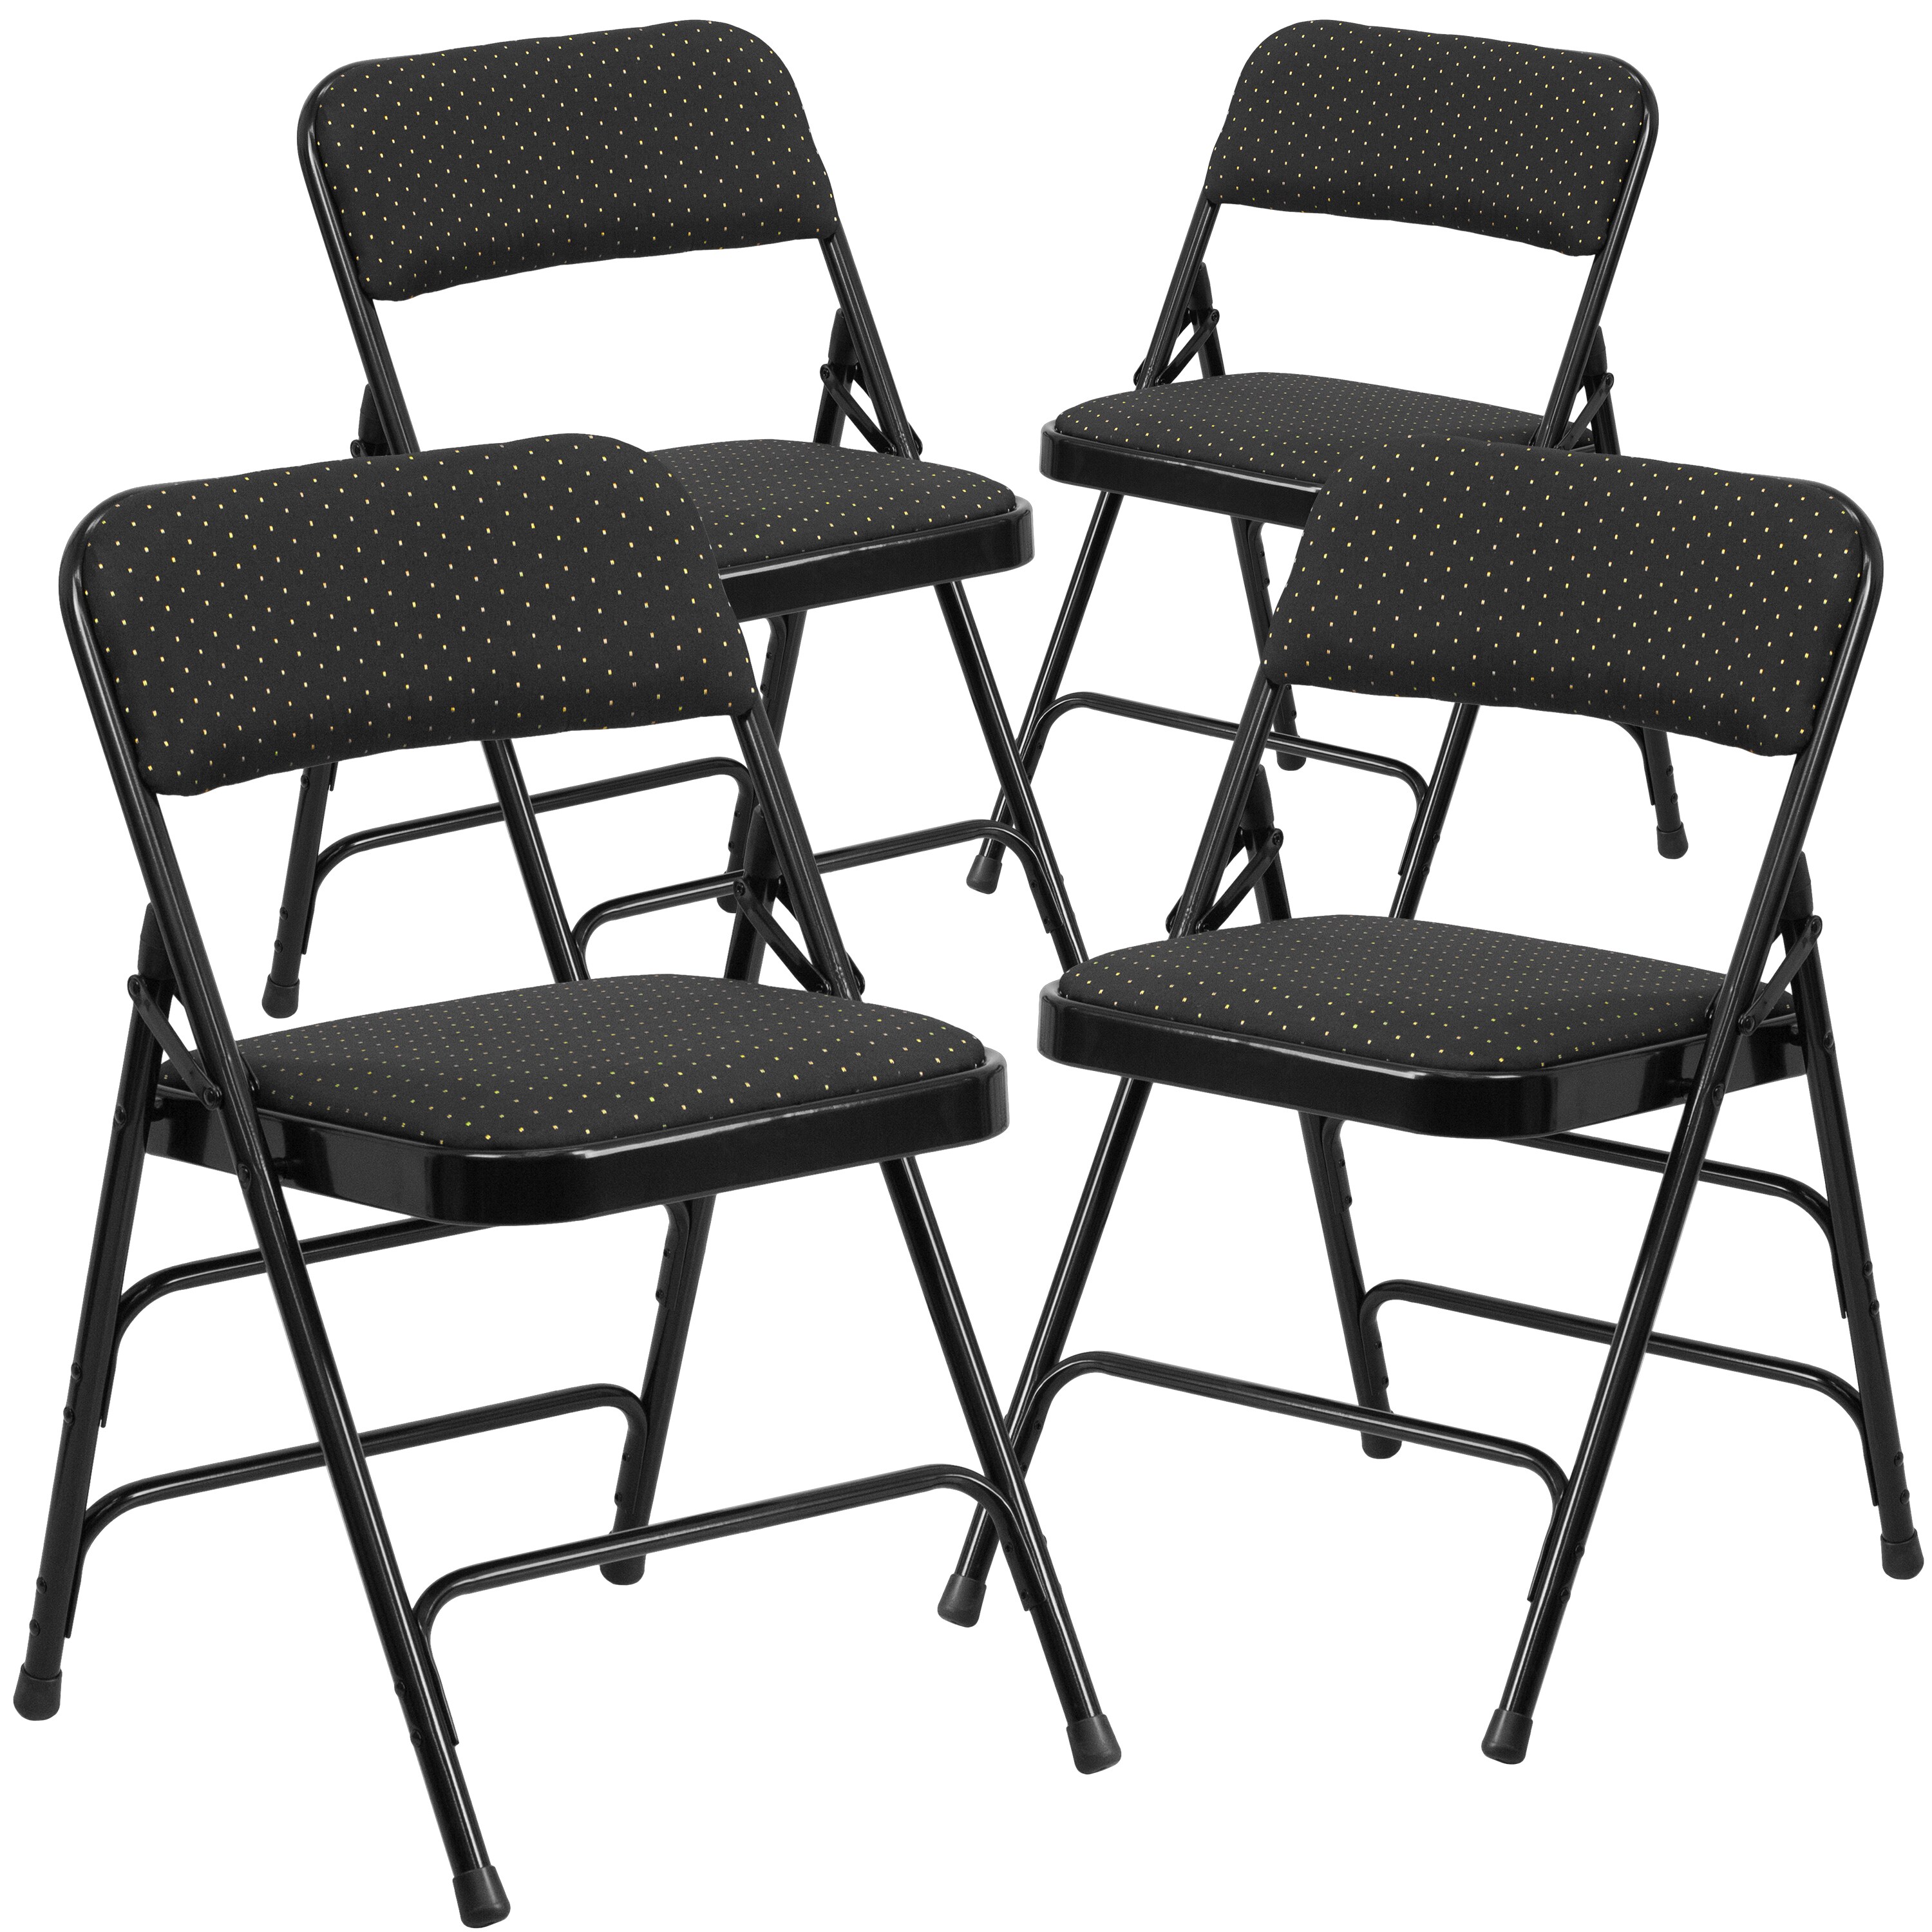 LOT OF 4 HERCULES SERIES CURVED  BLACK PATTERNED FABRIC FOLDING METAL CHAIR 